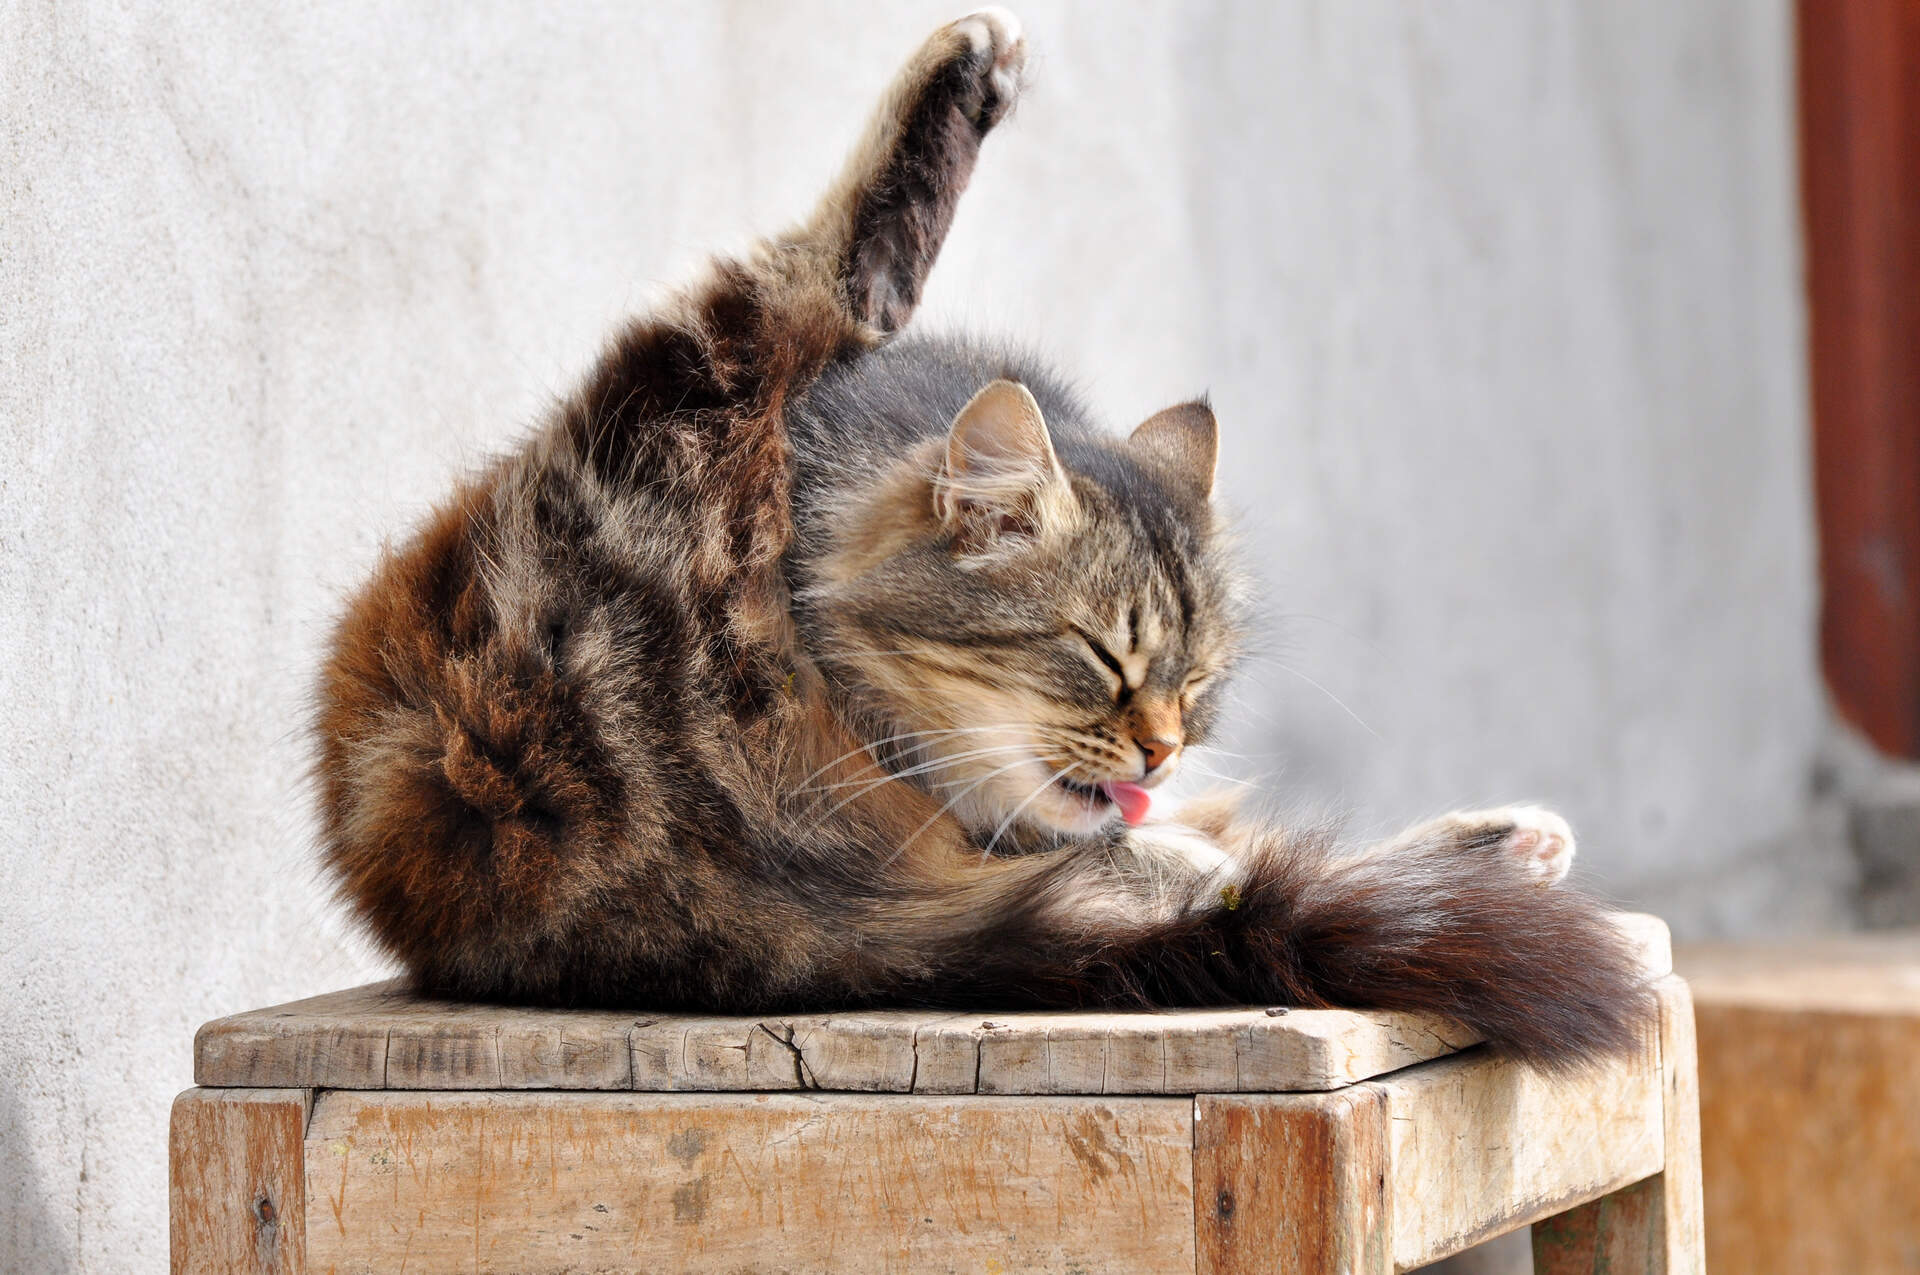 A cat grooming their tail